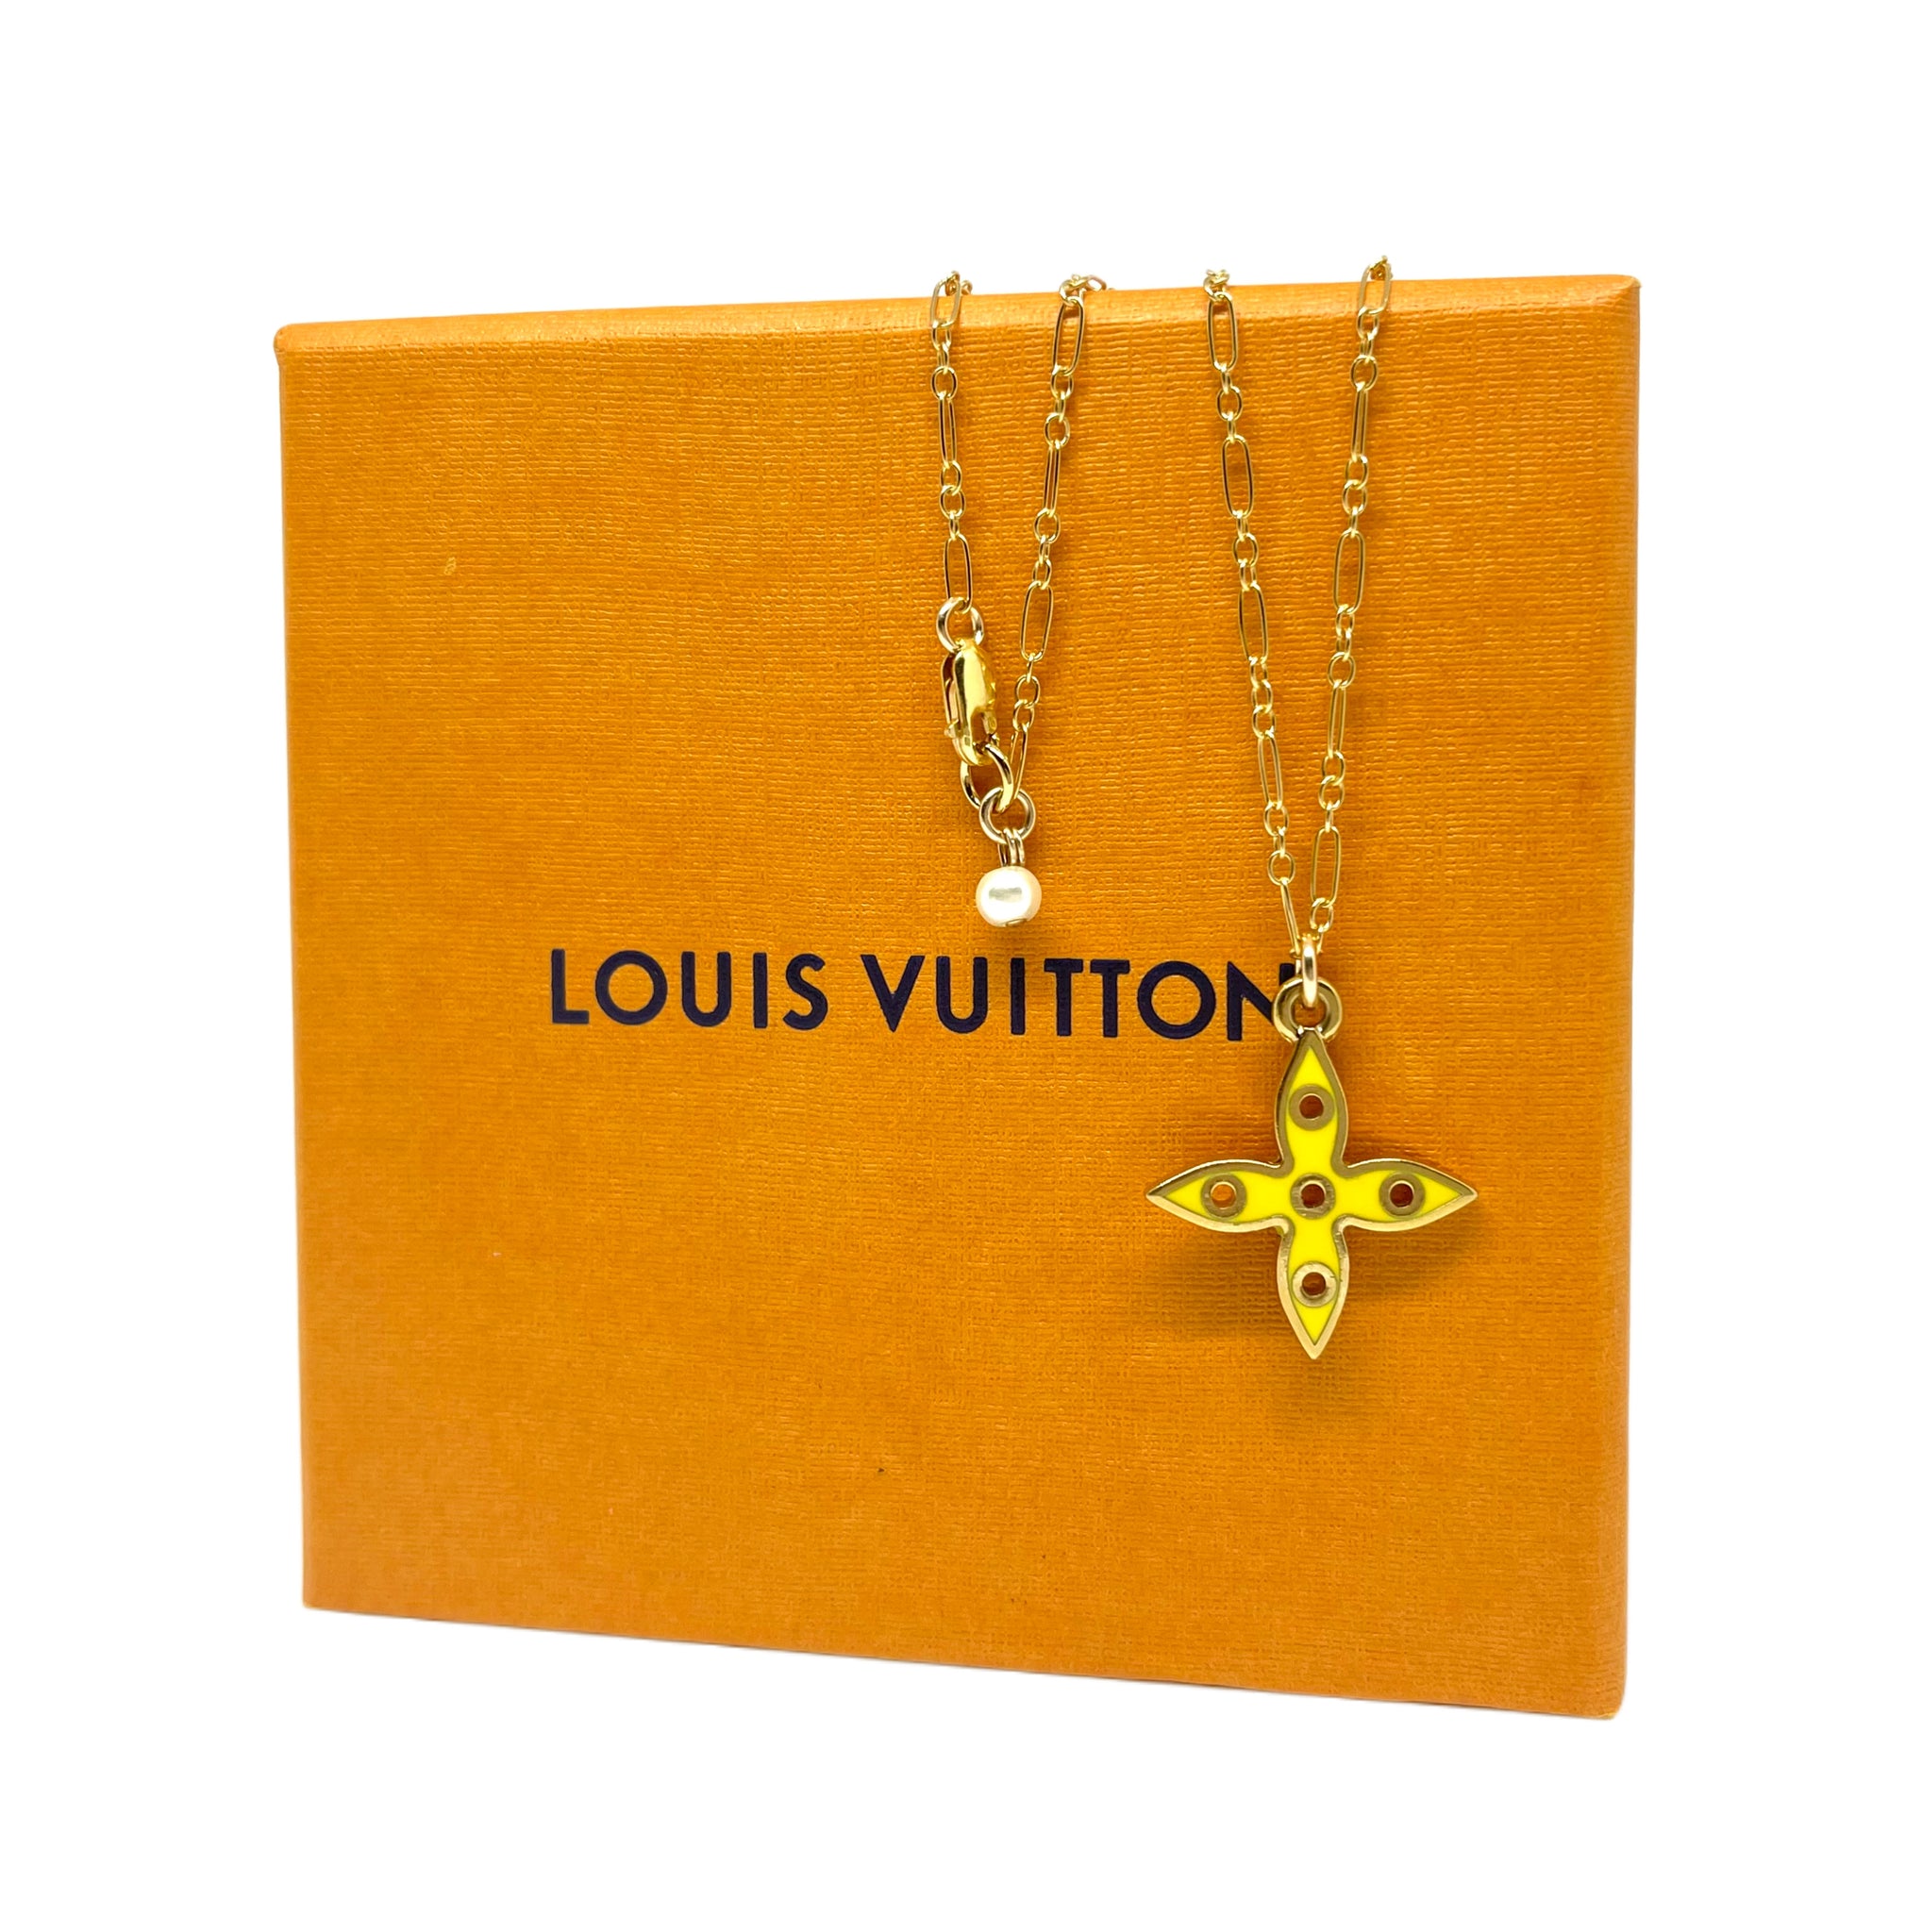 Louis Vuitton - Authenticated Star Blossom Necklace - Pink Gold Gold for Women, Very Good Condition